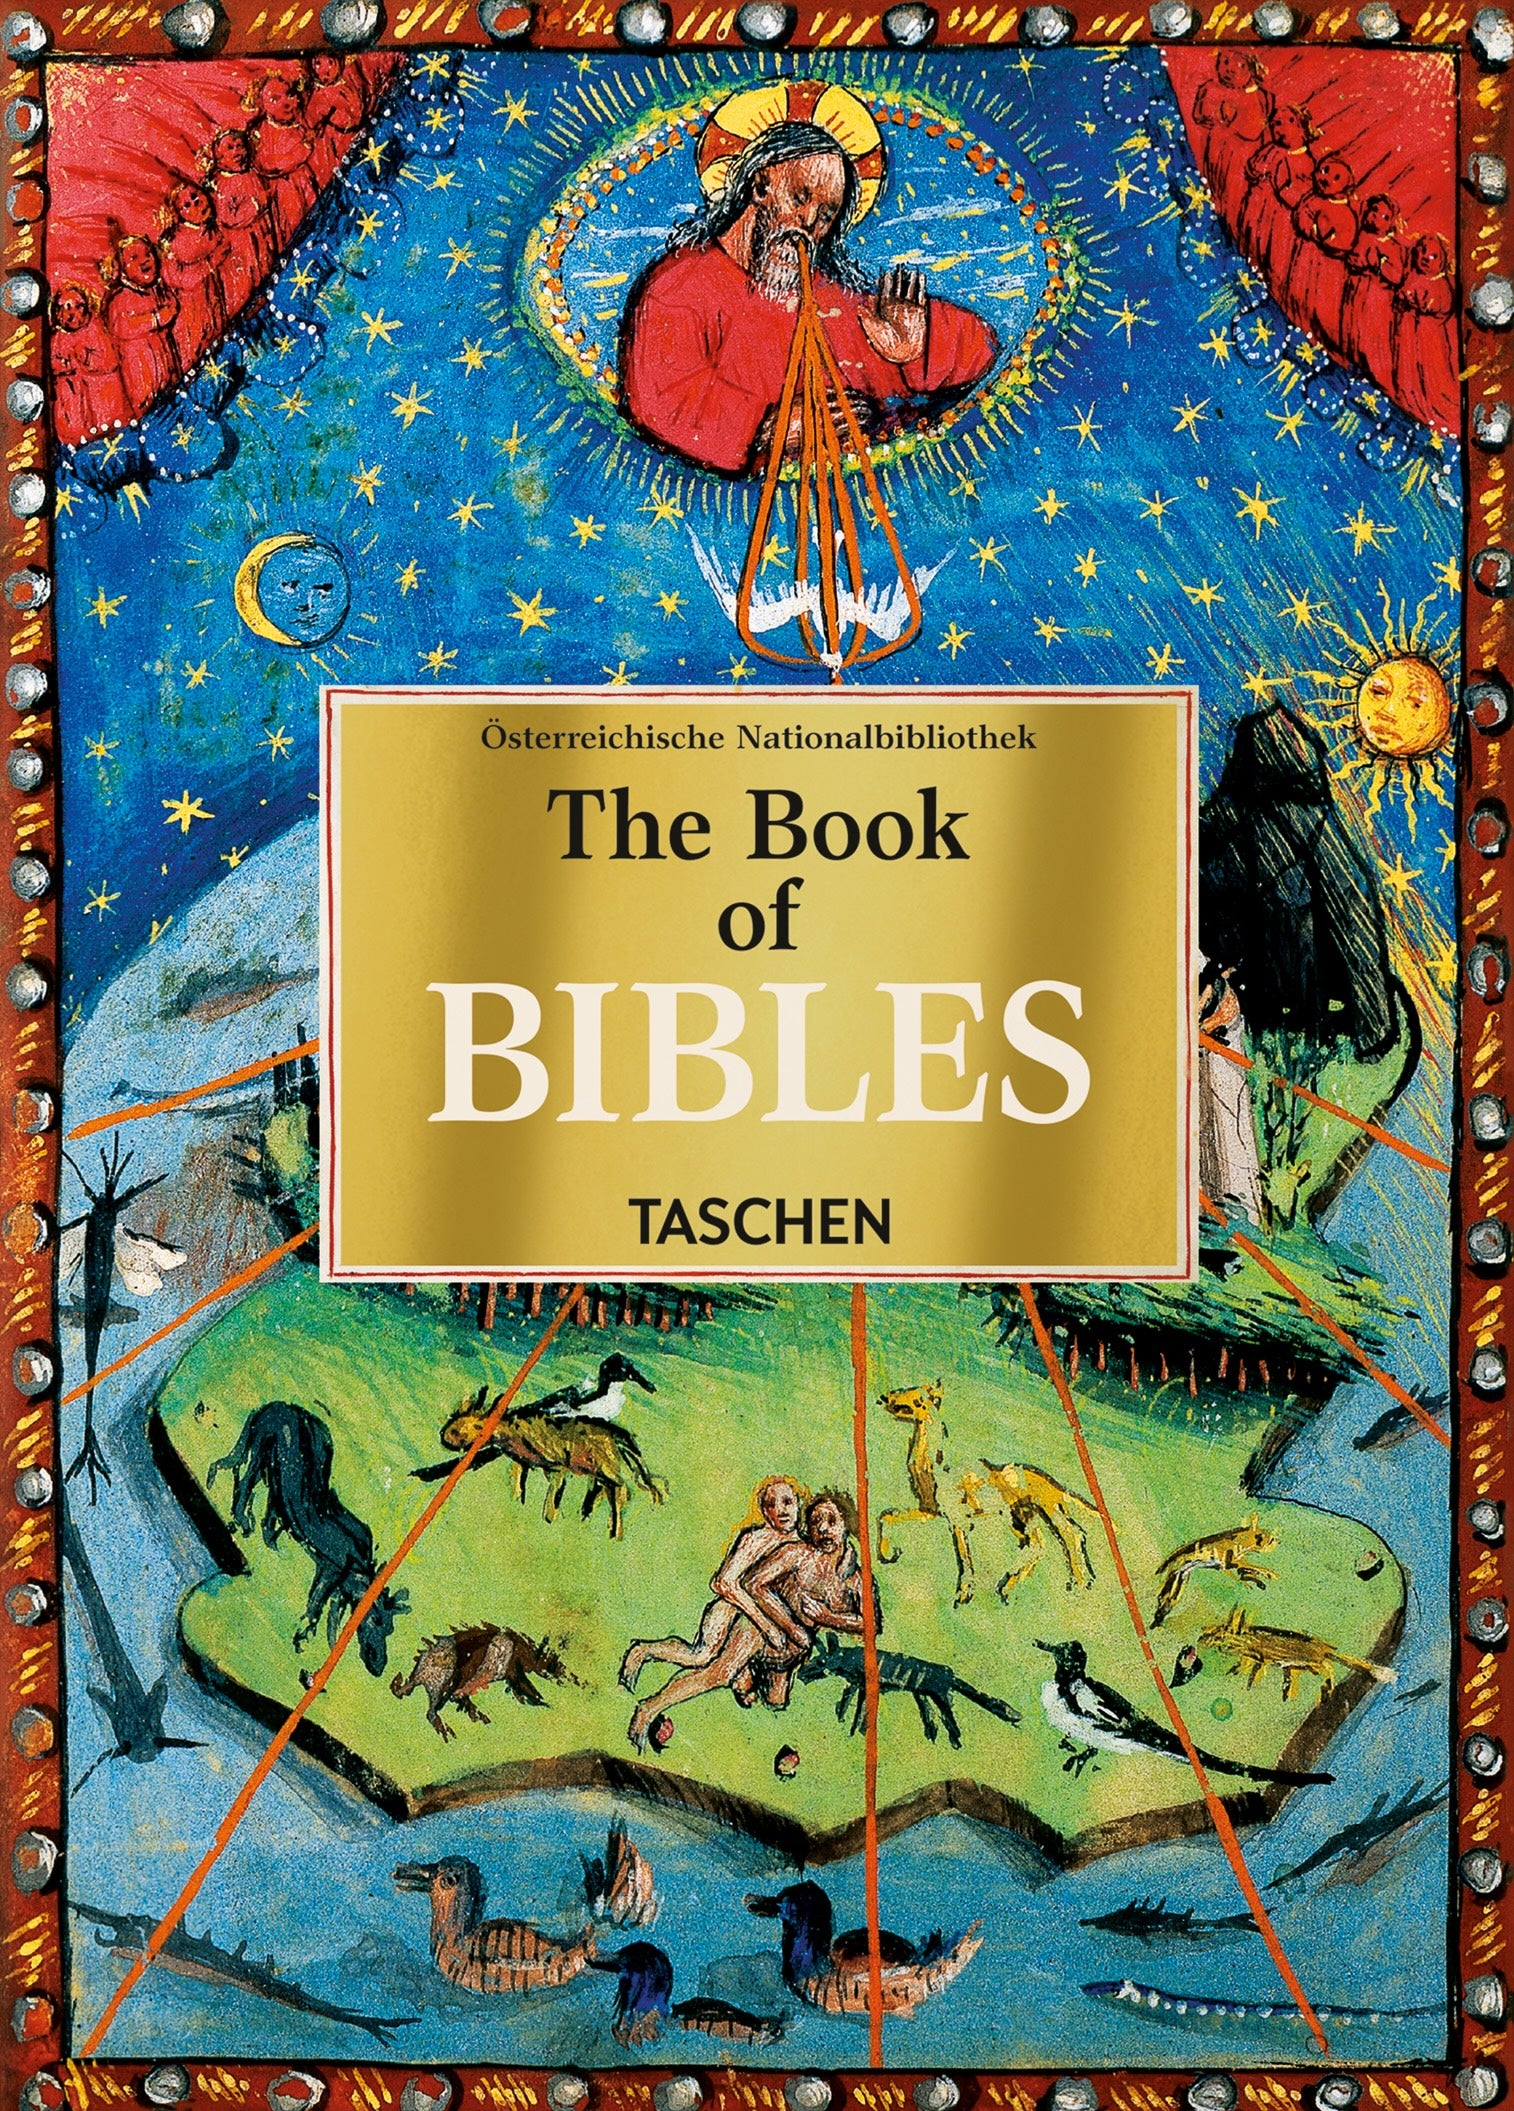 The Book of Bibles. 40th Edt.